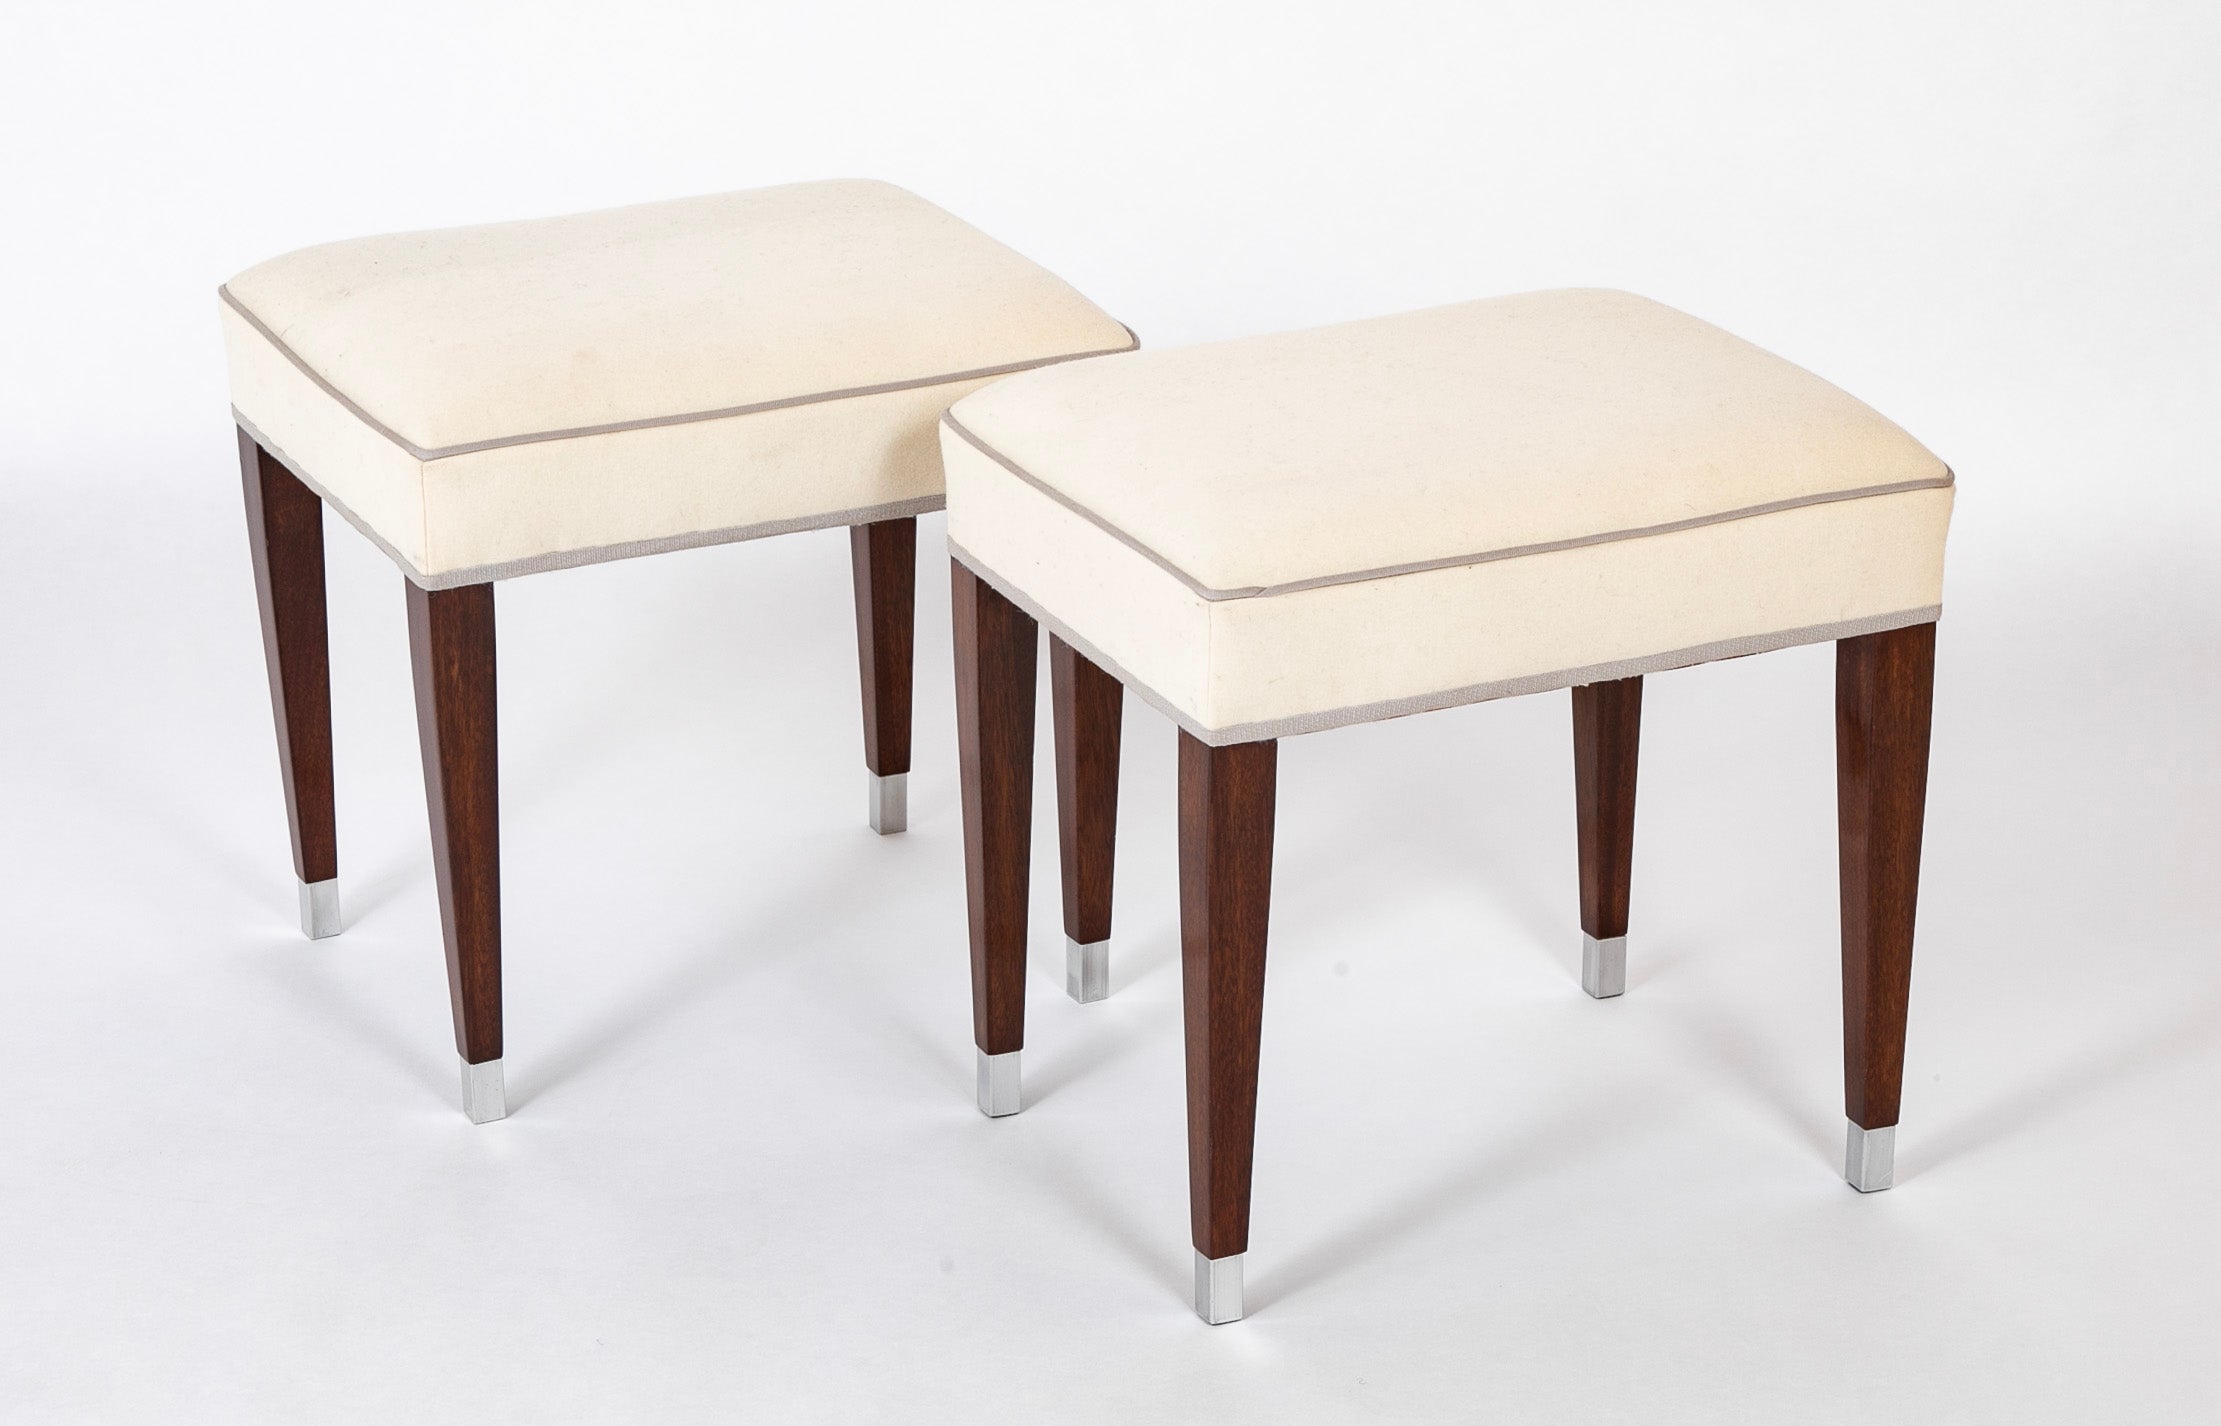 A Pair of Upholstered Stools by Jacques Adnet